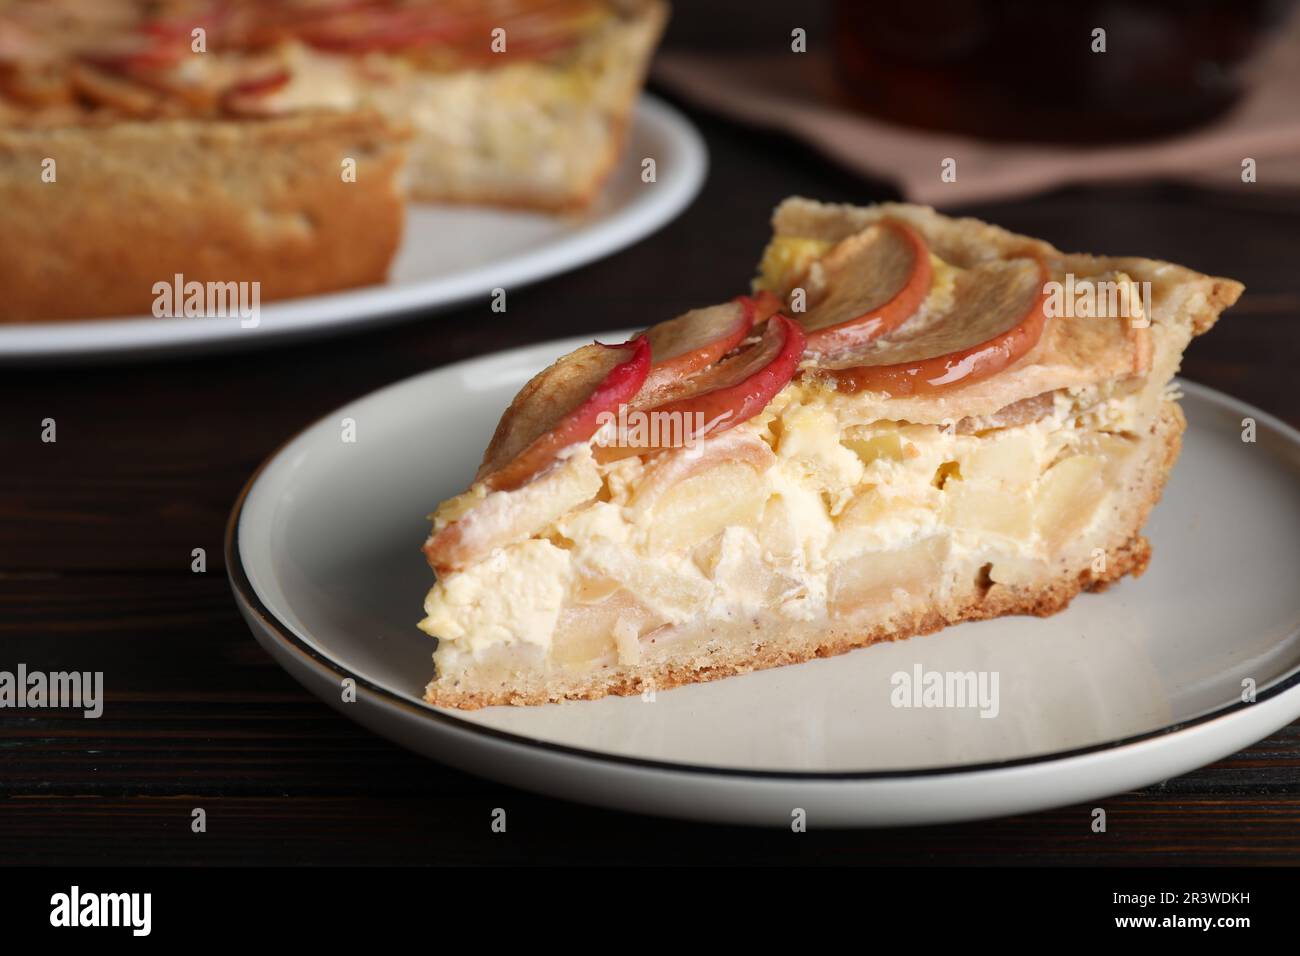 Piece of delicious homemade apple pie on wooden table, closeup Stock Photo